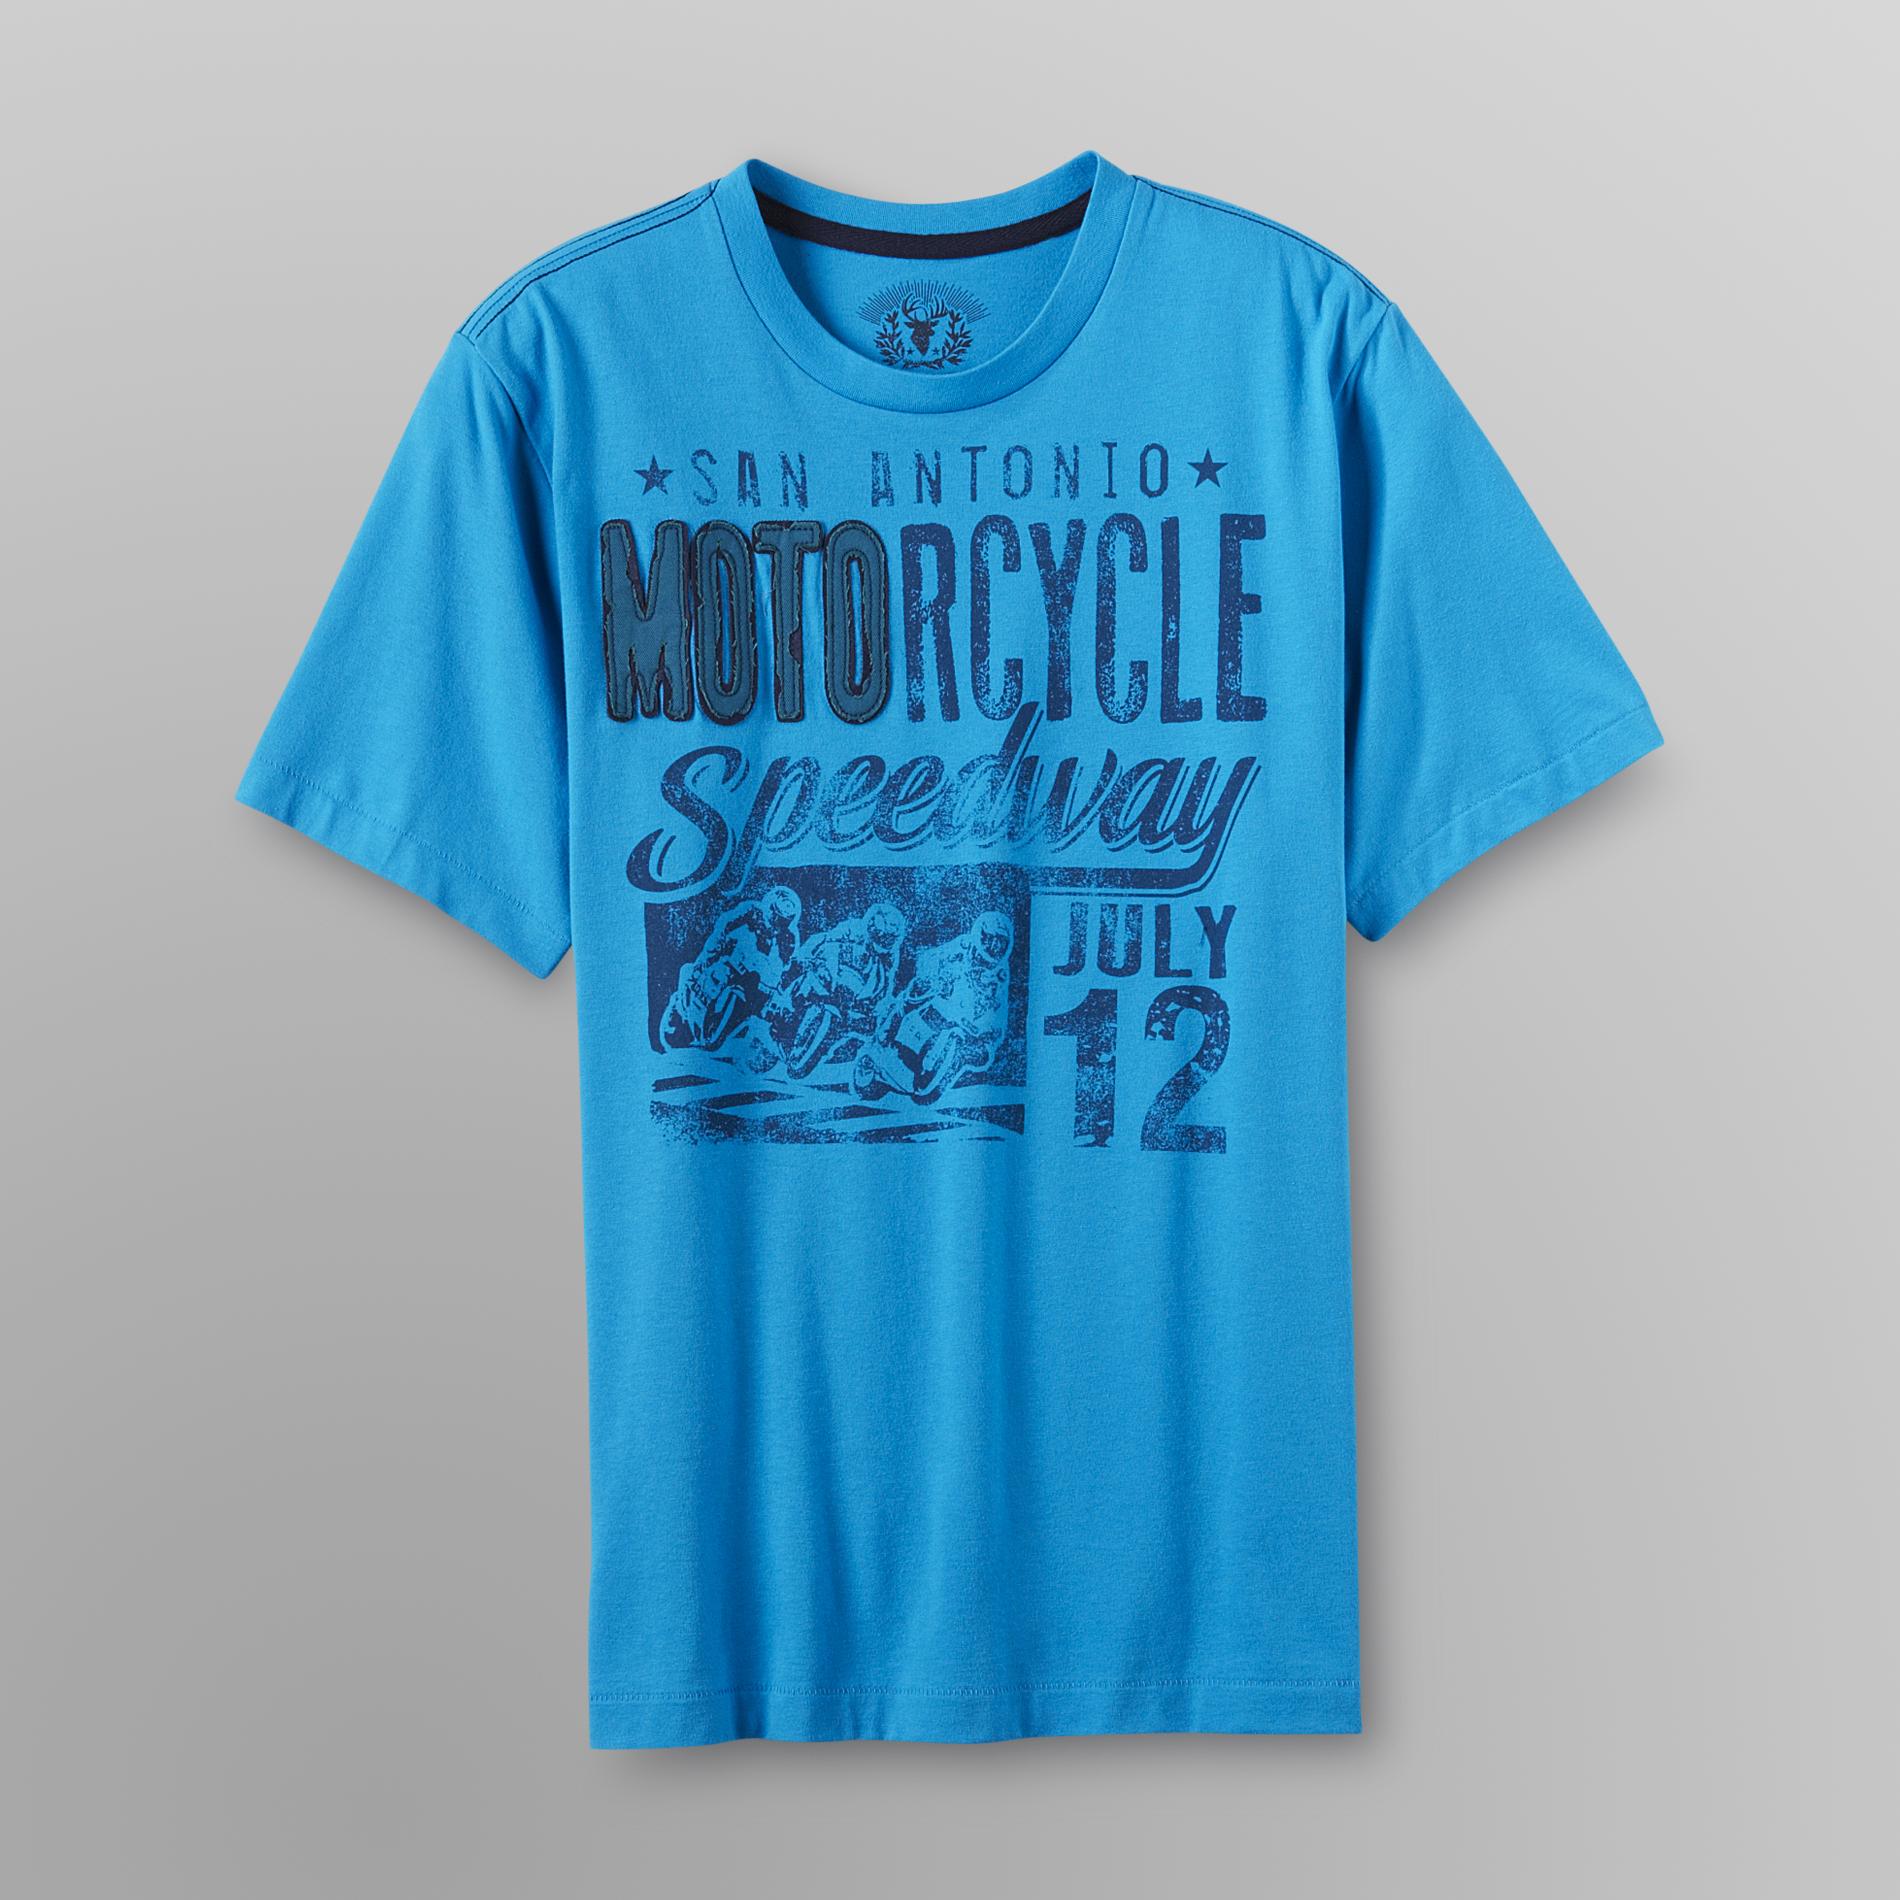 Roebuck & Co. Young Men's Patch T-Shirt - Motorcycle Speedway